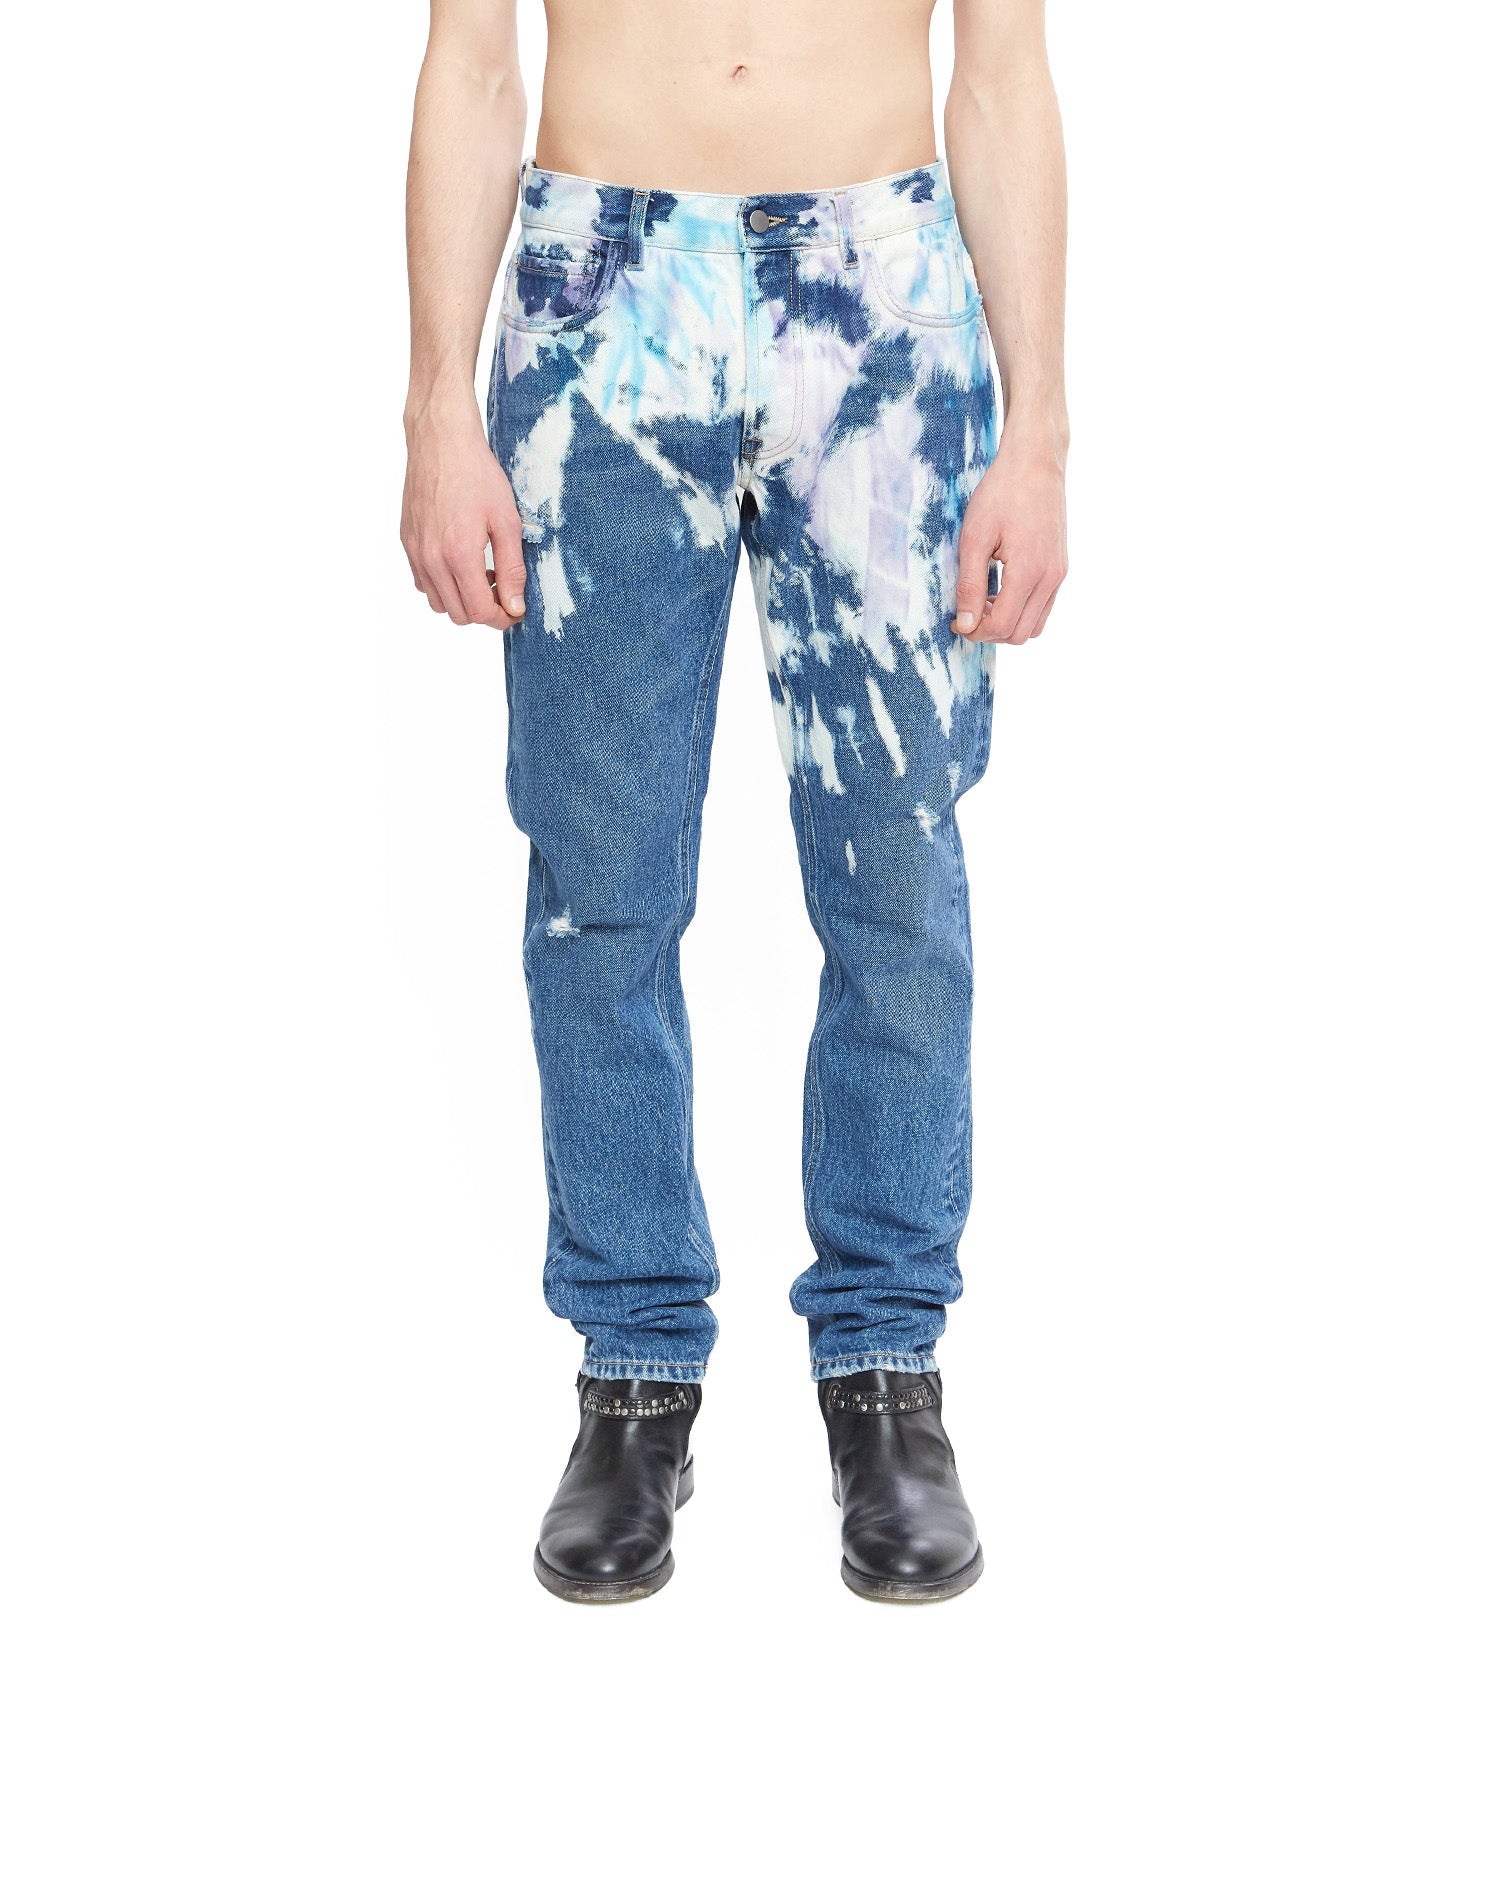 SLIM TIE DYE Slim fit jeans in tie-dye denim, 5 pockets, hidden front button closure. Metallic logo detail on the back. 100% cotton. Made in Italy. HTC LOS ANGELES